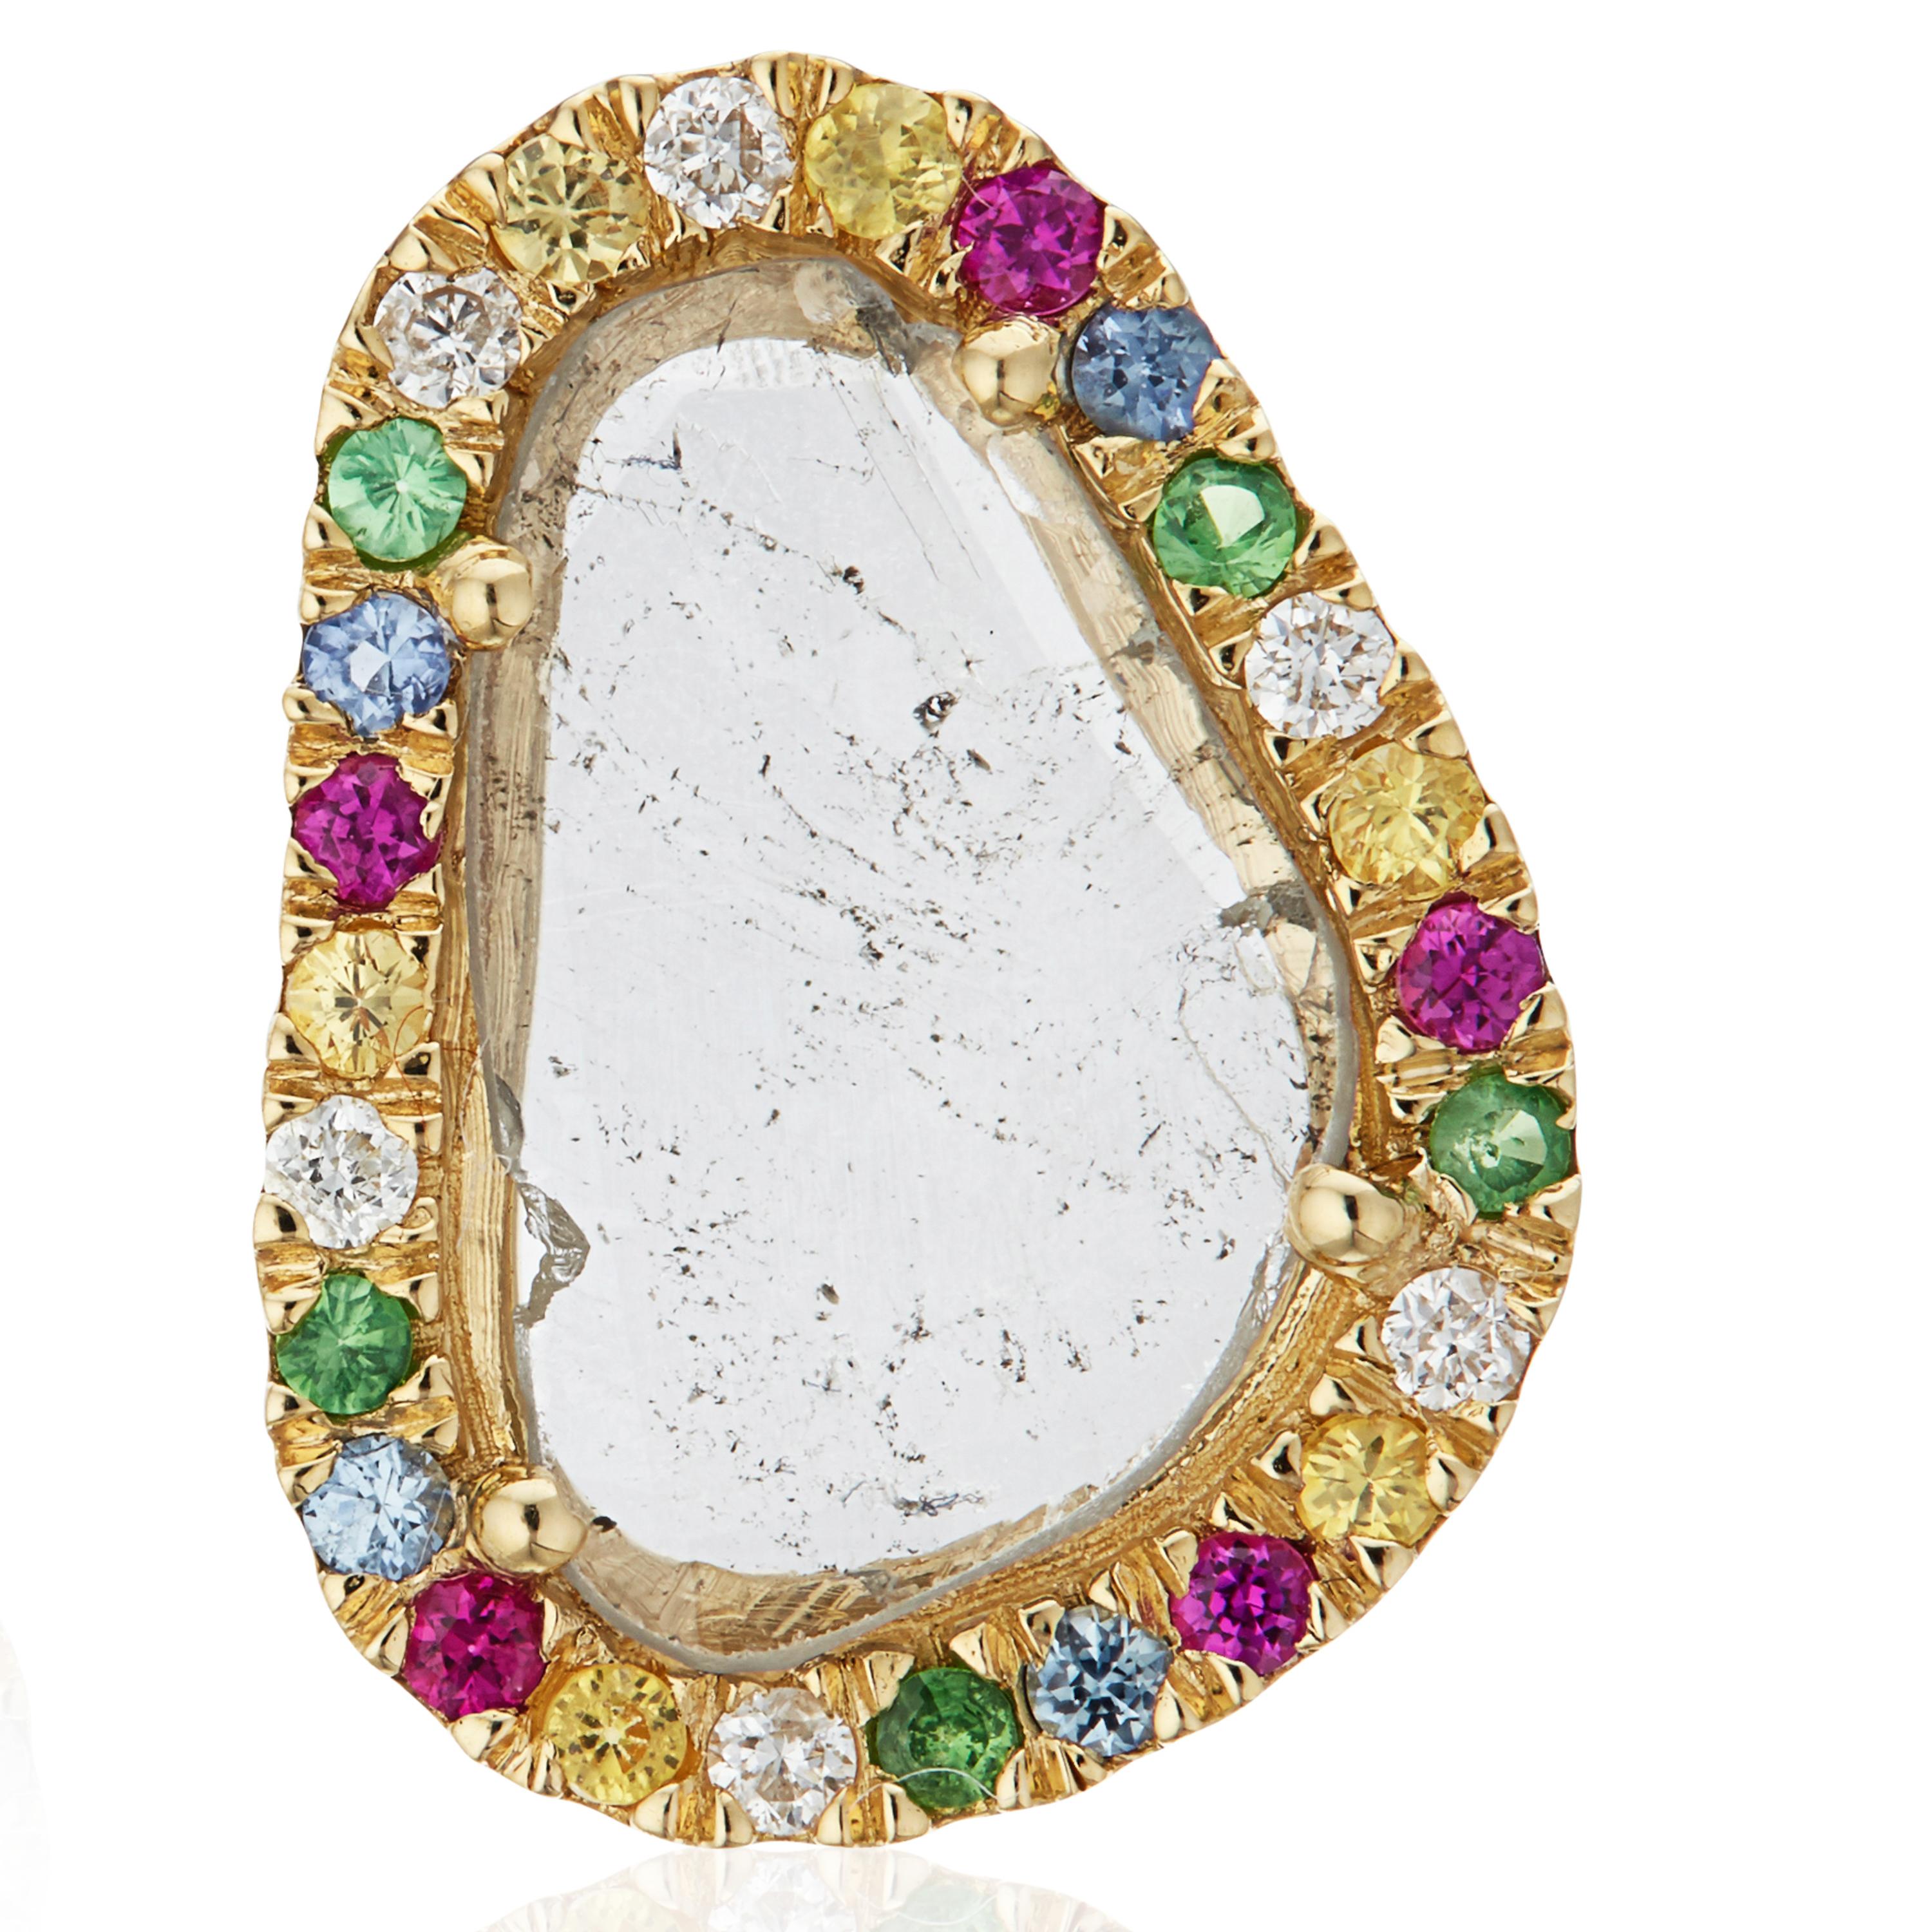 Gross weight: 2.76 grams
The 18K gold weight is 2.45 grams. 
The total weight of diamonds in the pair is 1.11 carats. 
The total weight of the coloured gems is 0.52 carats. 

Festive and fun, this colourful combination features sparkling diamonds,